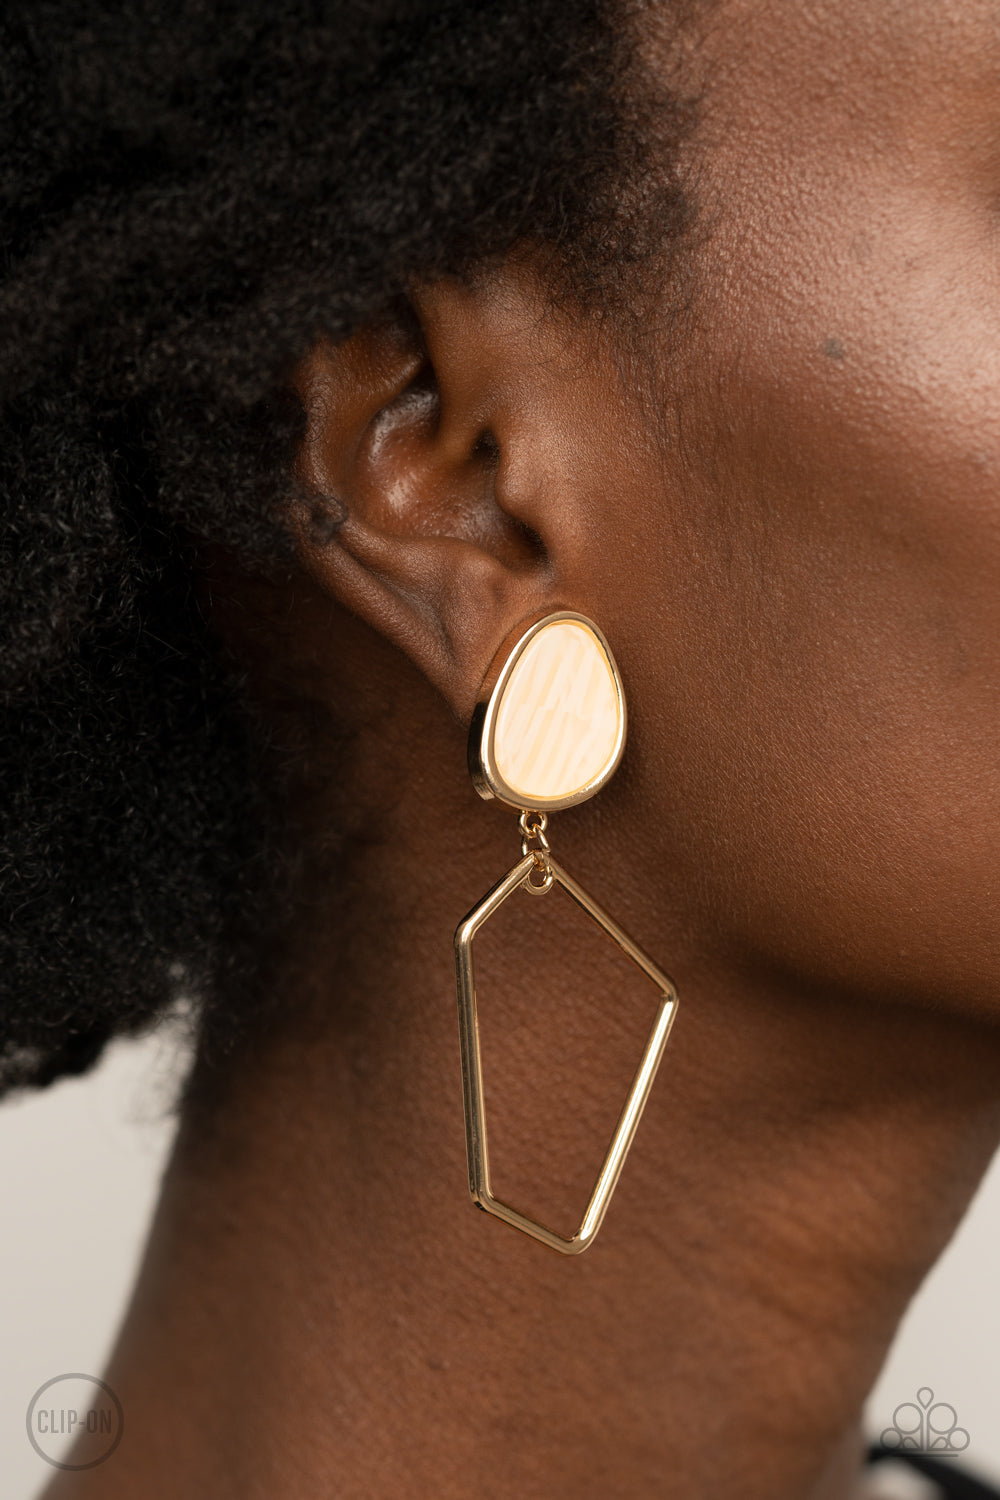 Retro Reverie Gold Clip-On Earring - Paparazzi Accessories  Encased in a classic gold fitting, an abstract faux stone fitting gives way to an airy geometric gold frame for a refined asymmetrical look. Earring attaches to a standard clip-on fitting.  All Paparazzi Accessories are lead free and nickel free!  Sold as one pair of clip-on earrings.